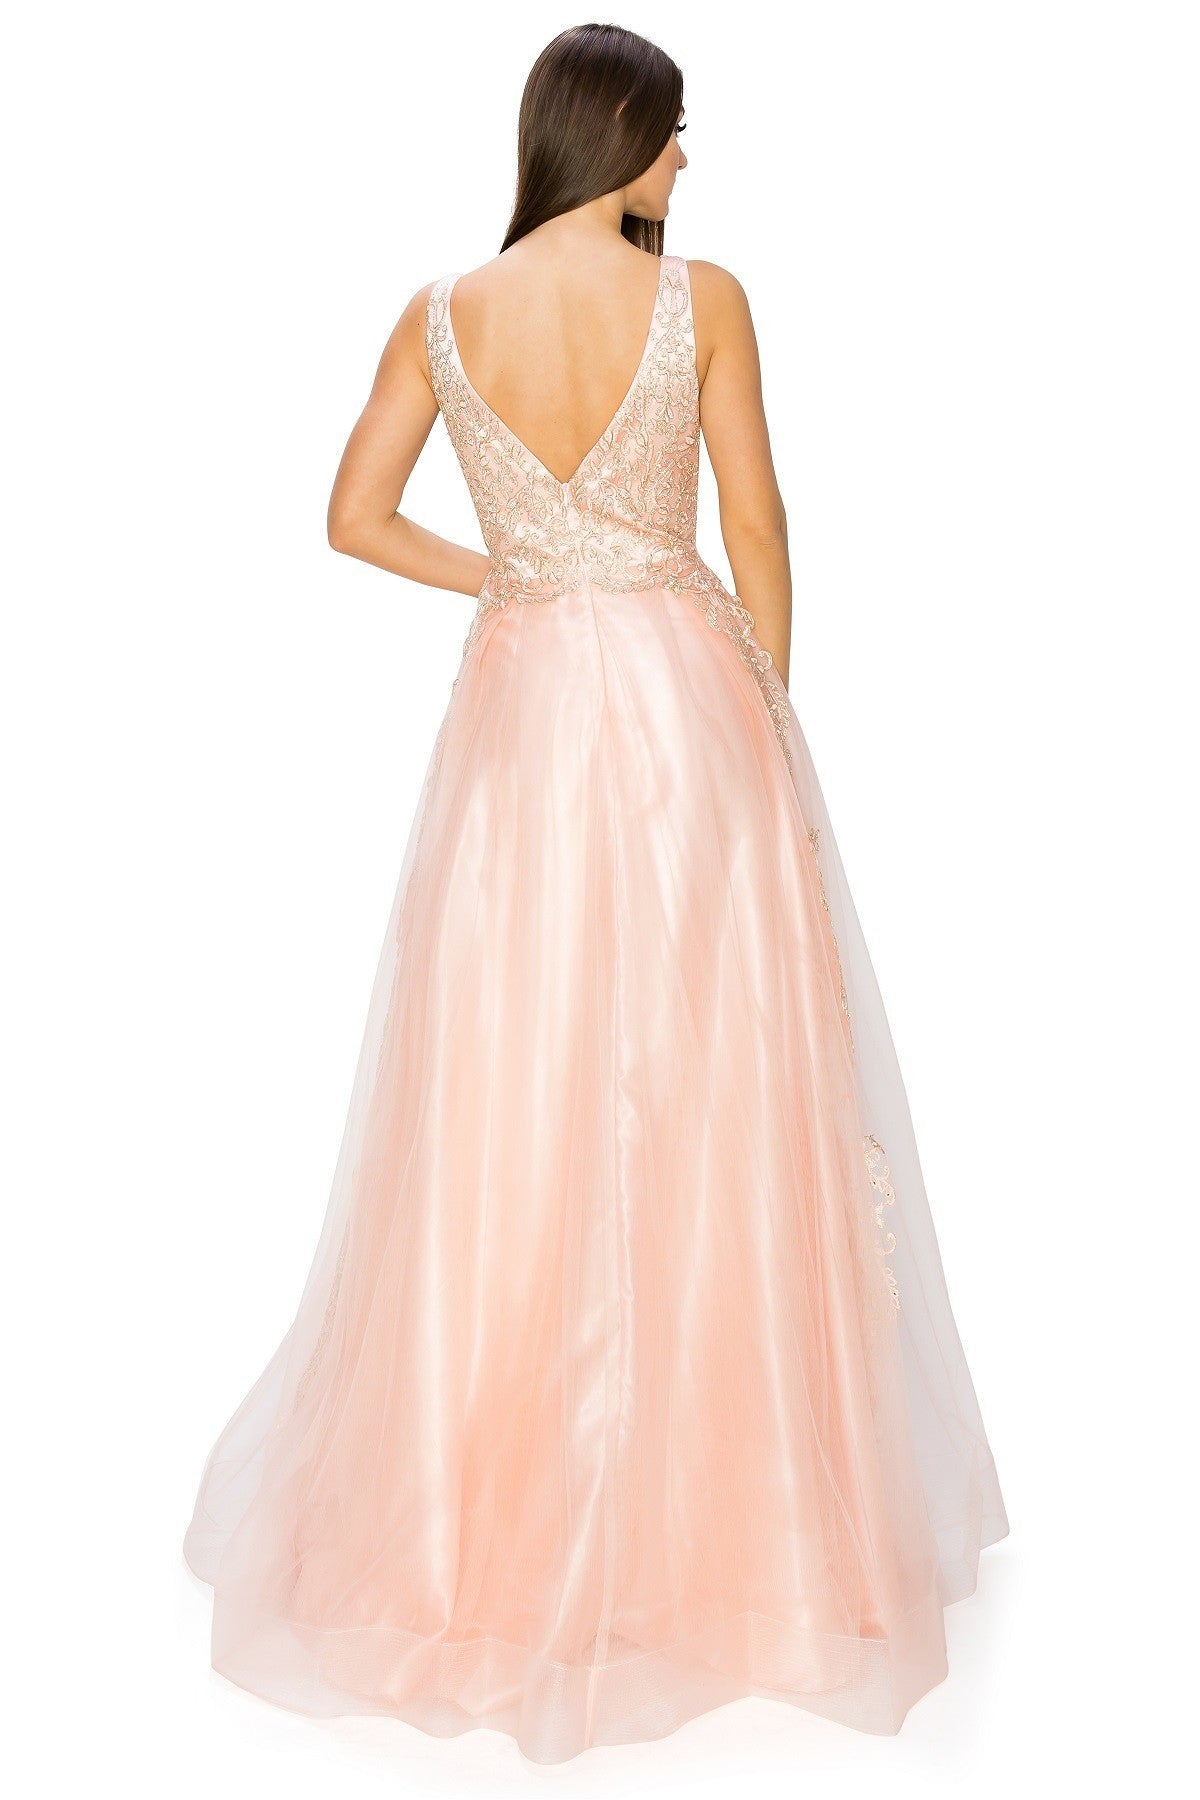 Blush Glitter Floral Lace Tulle Gown by Cinderella Couture USA AS8029J-Blush - Special Occasion/Curves